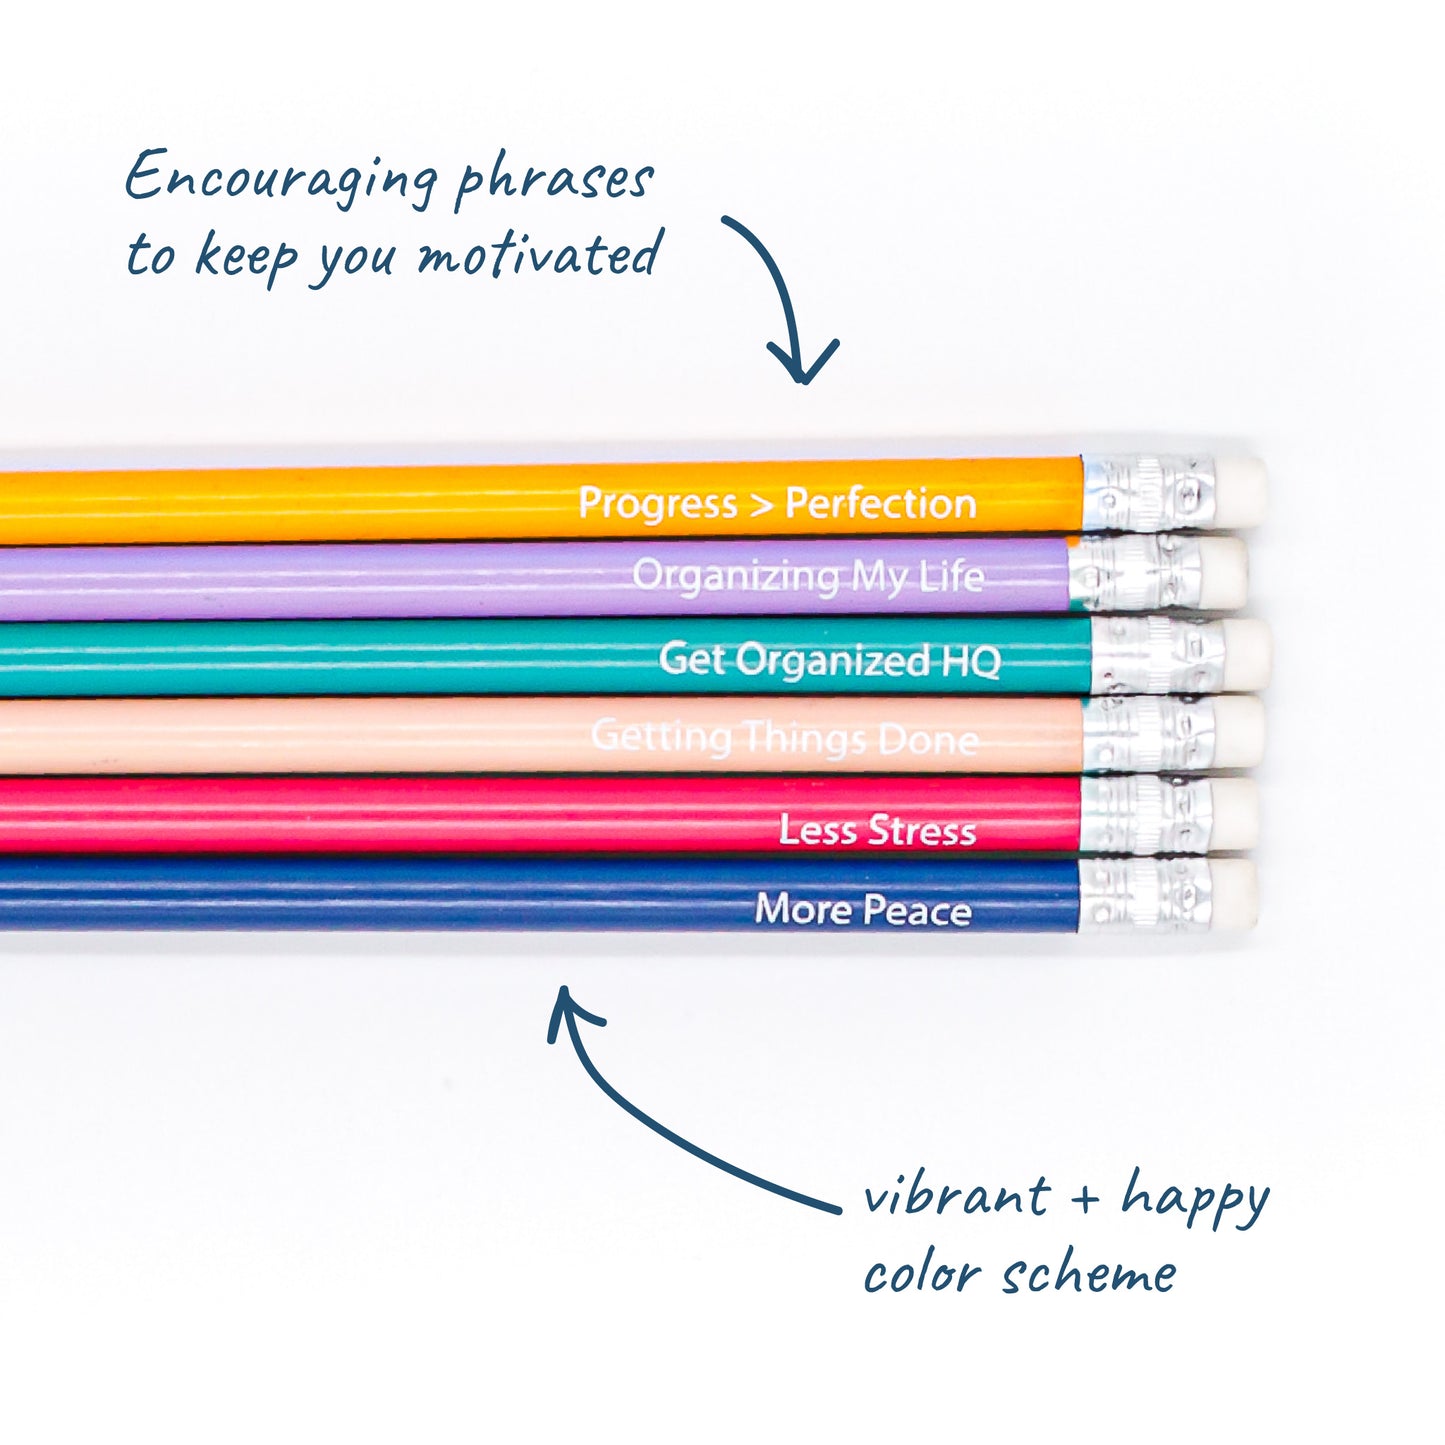 Get Organized HQ Pencils (Pack of 6)